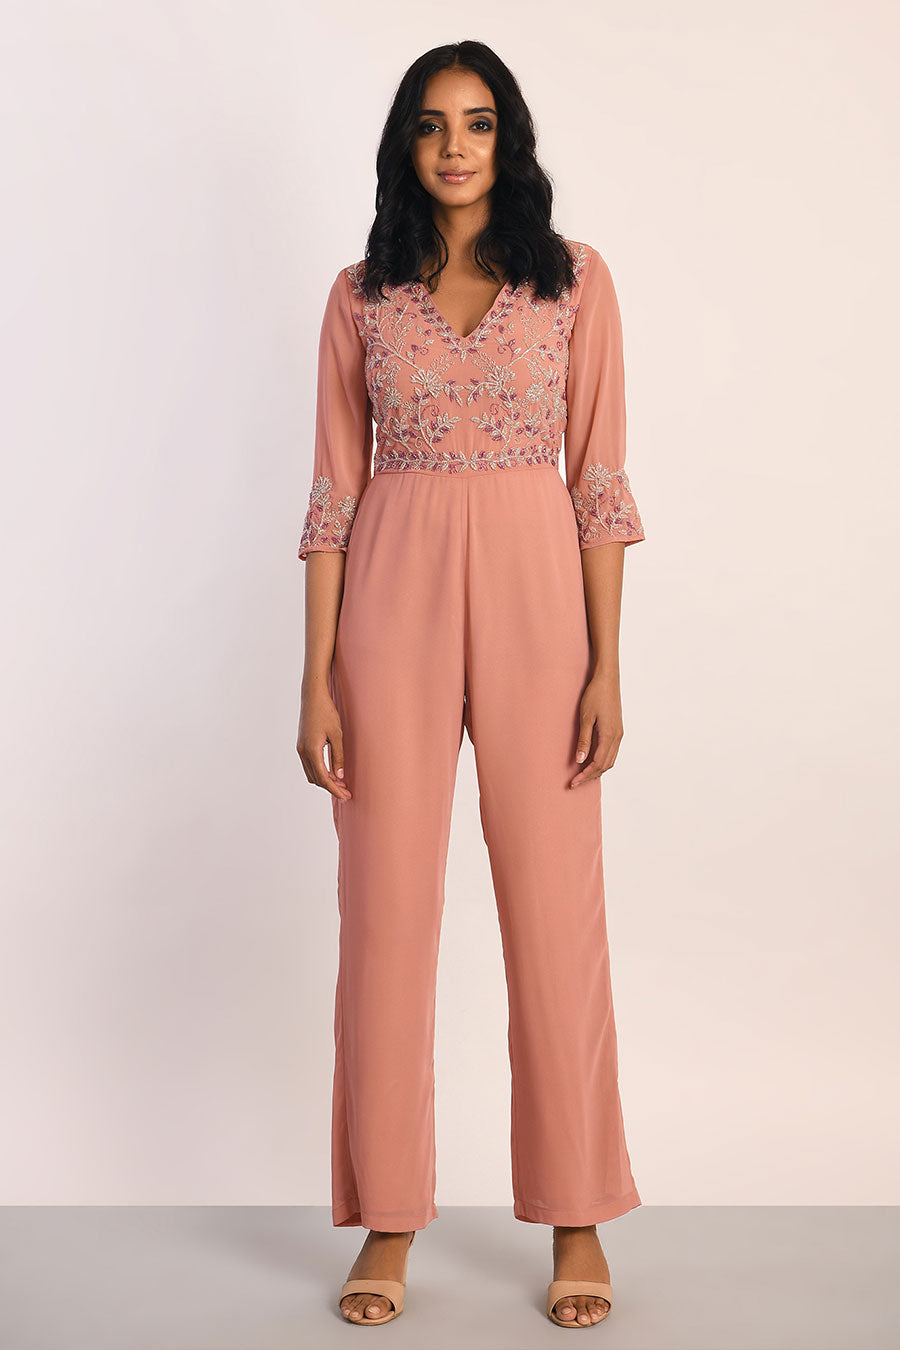 Vanilla Pink Floral Embroidery Jumpsuit